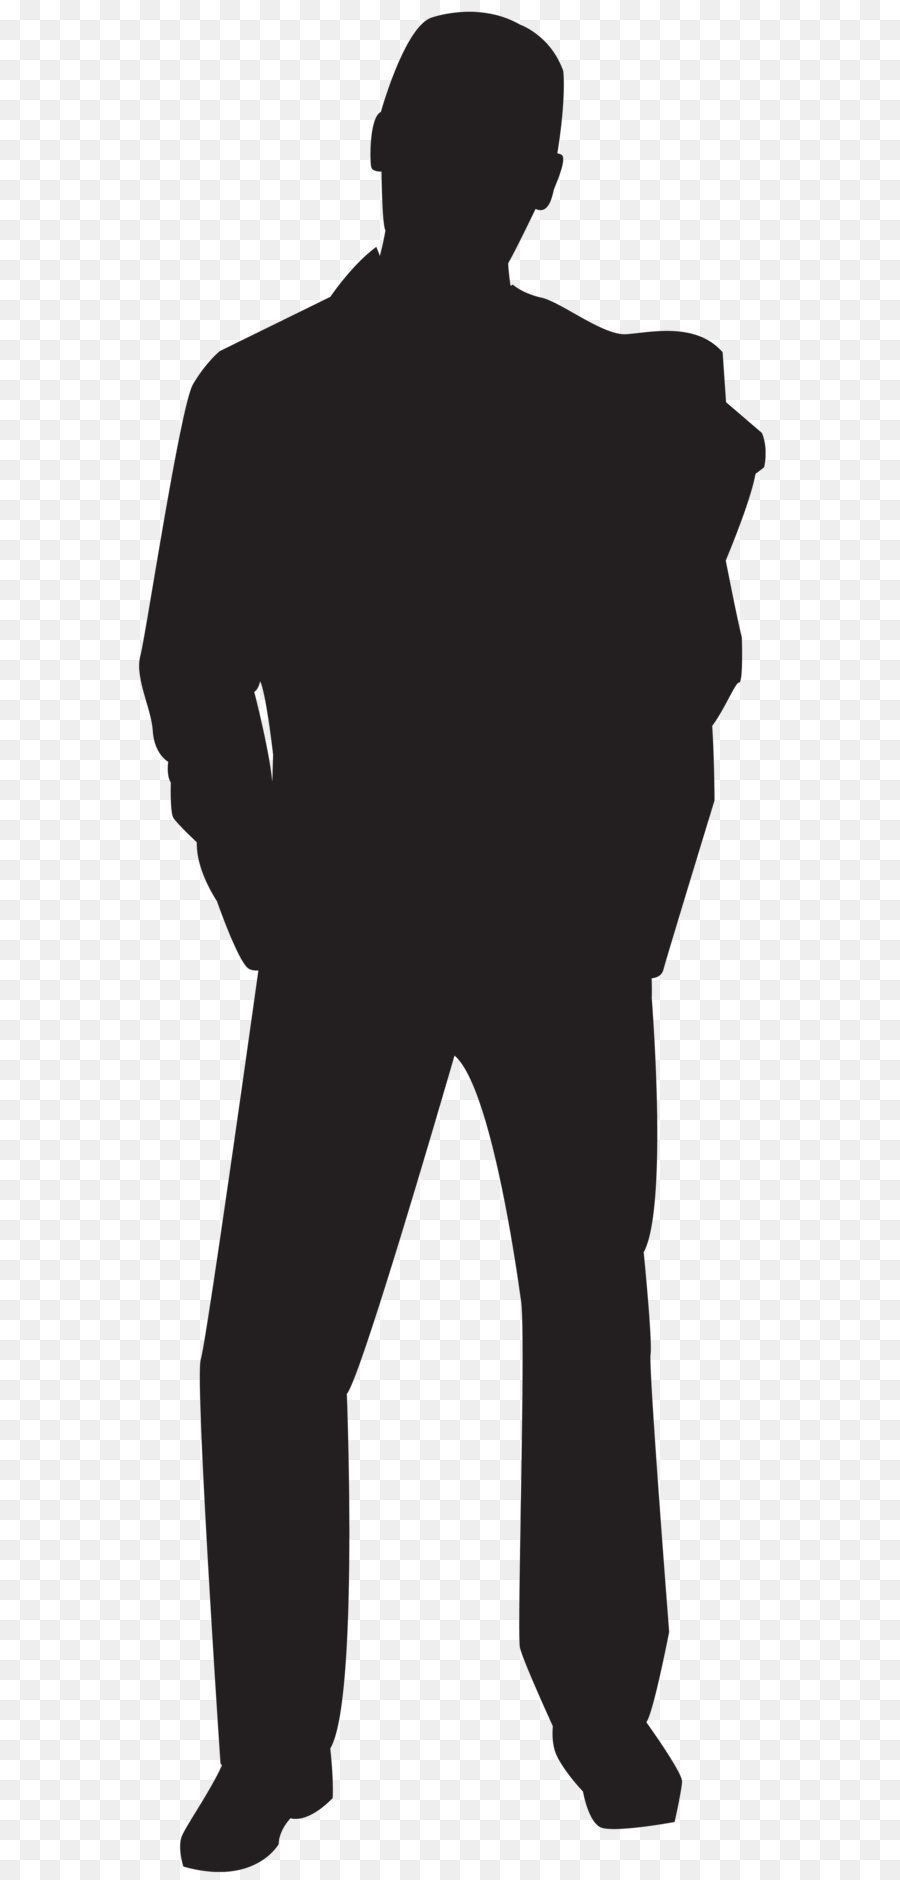 Free Standing Man Silhouette, Download Free Standing Man Silhouette png ...